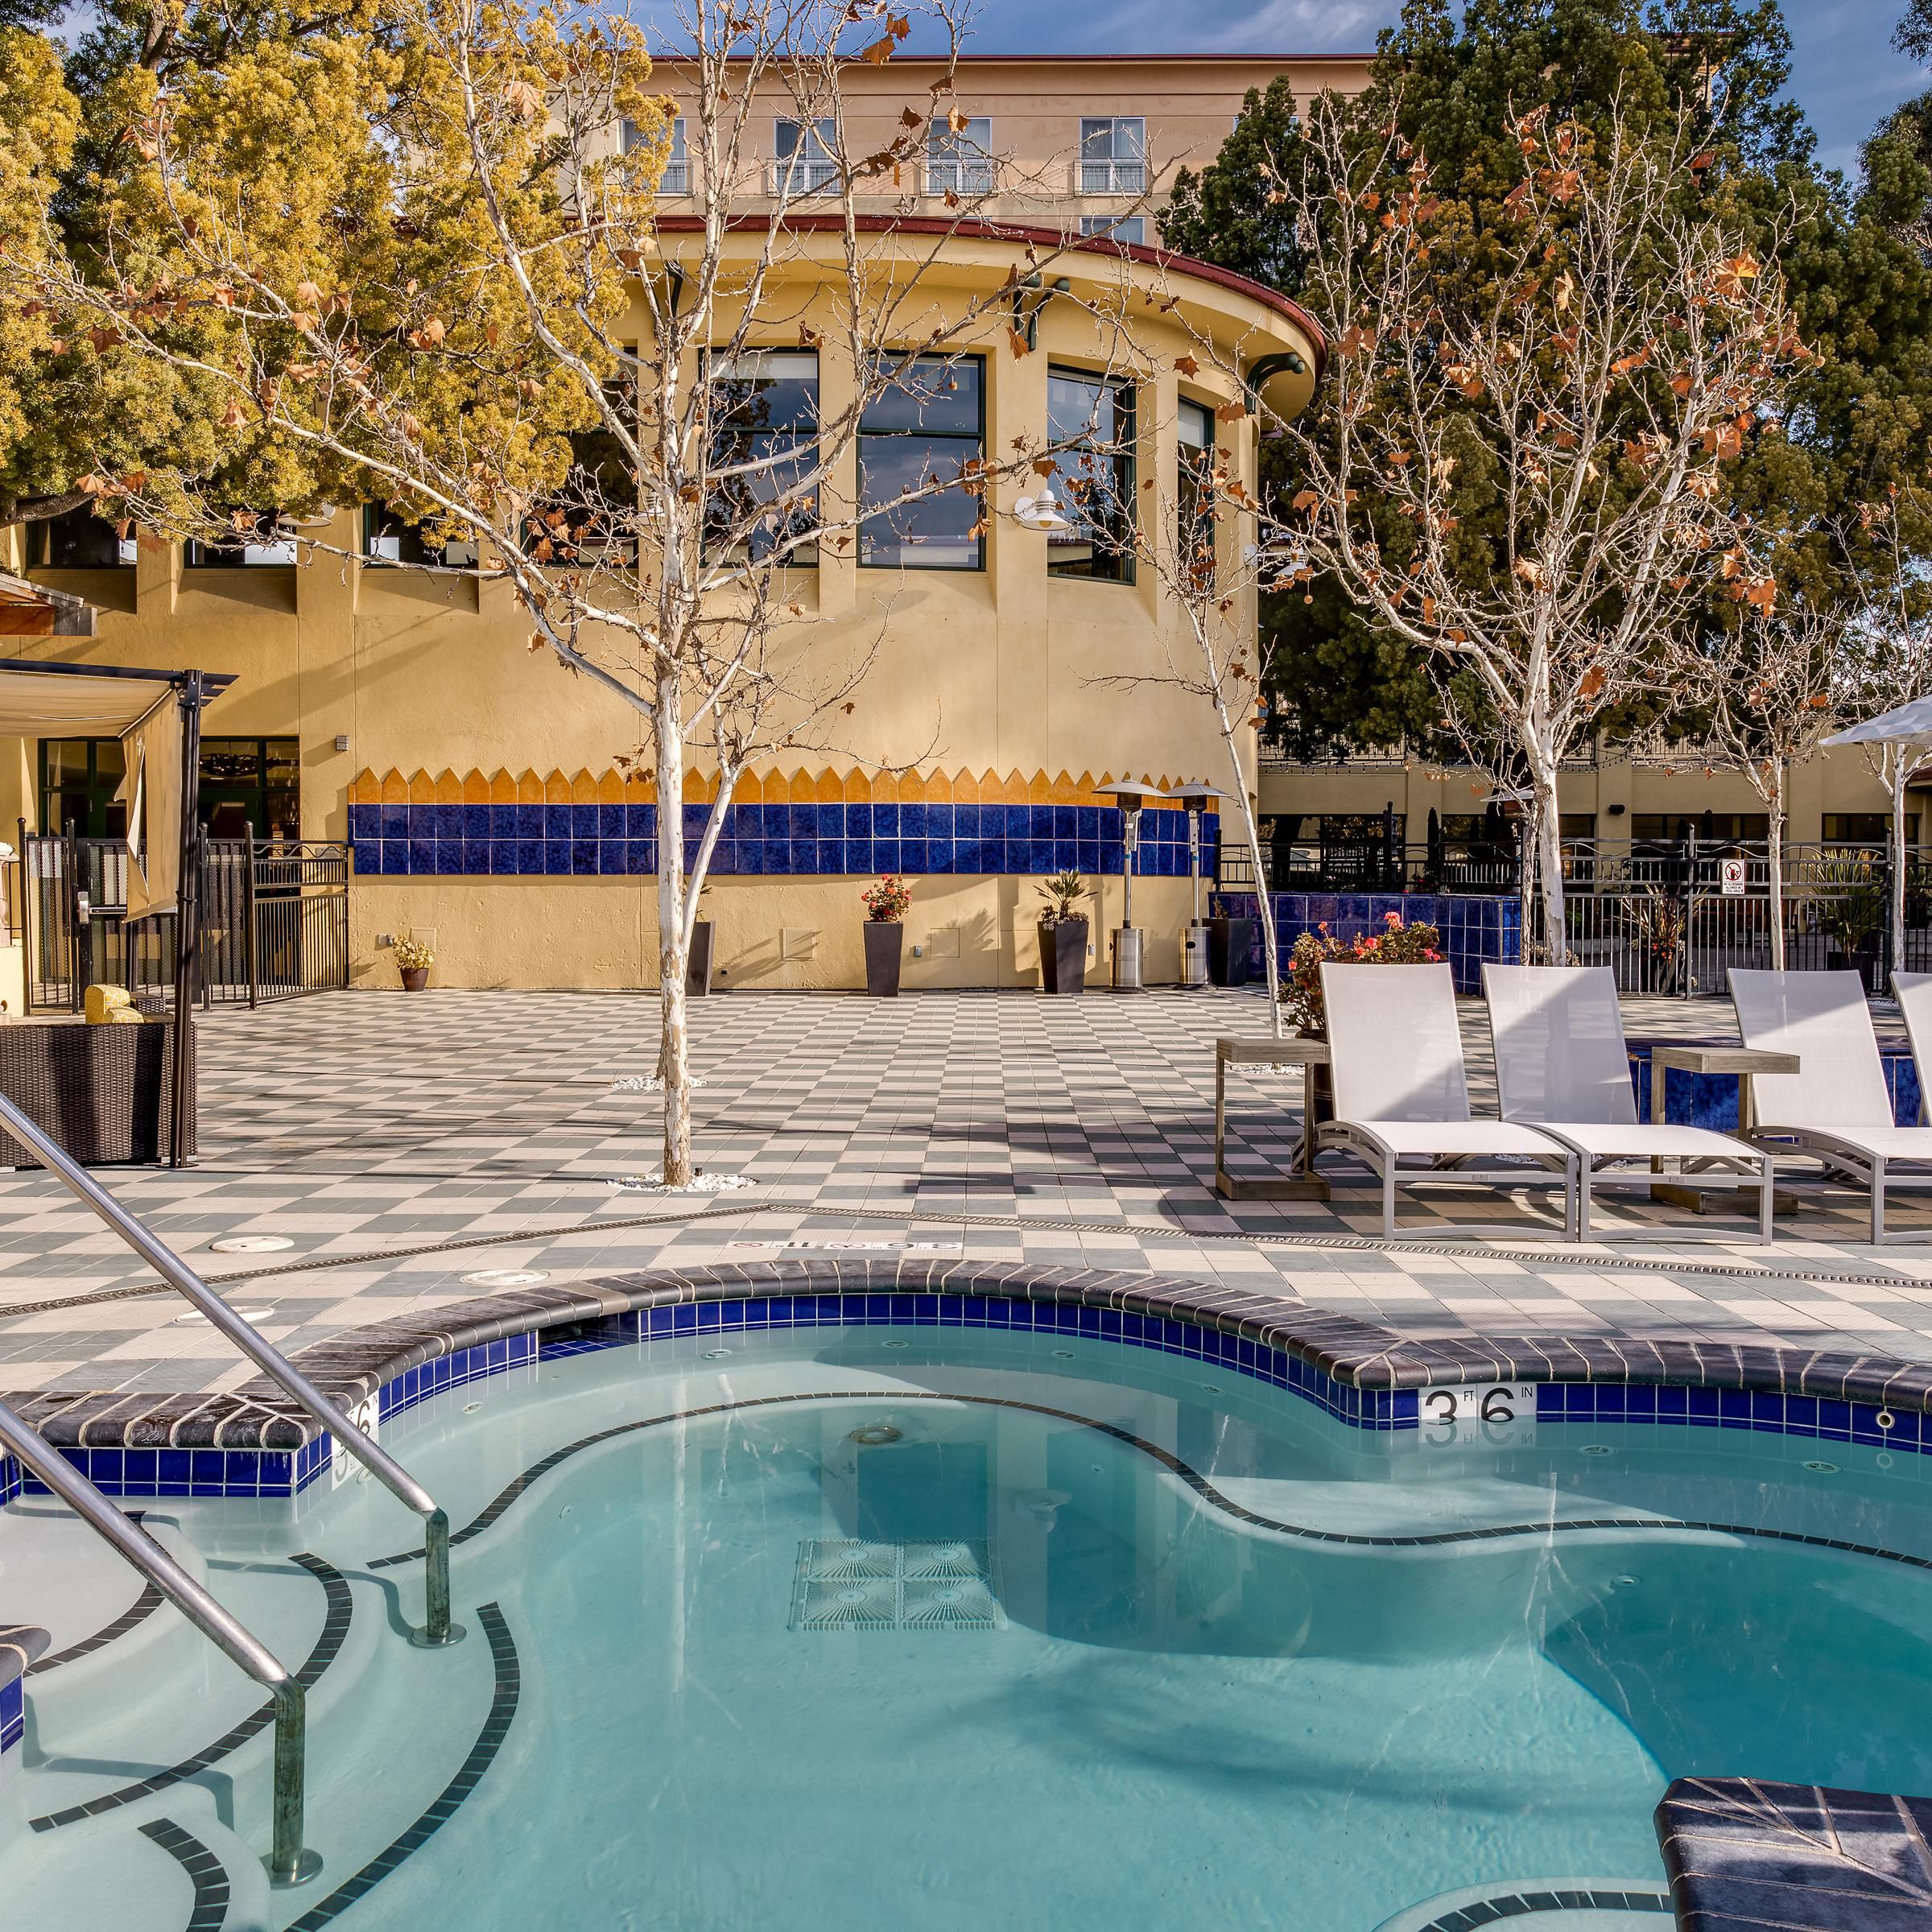 The largest pool deck in the area is available for private events